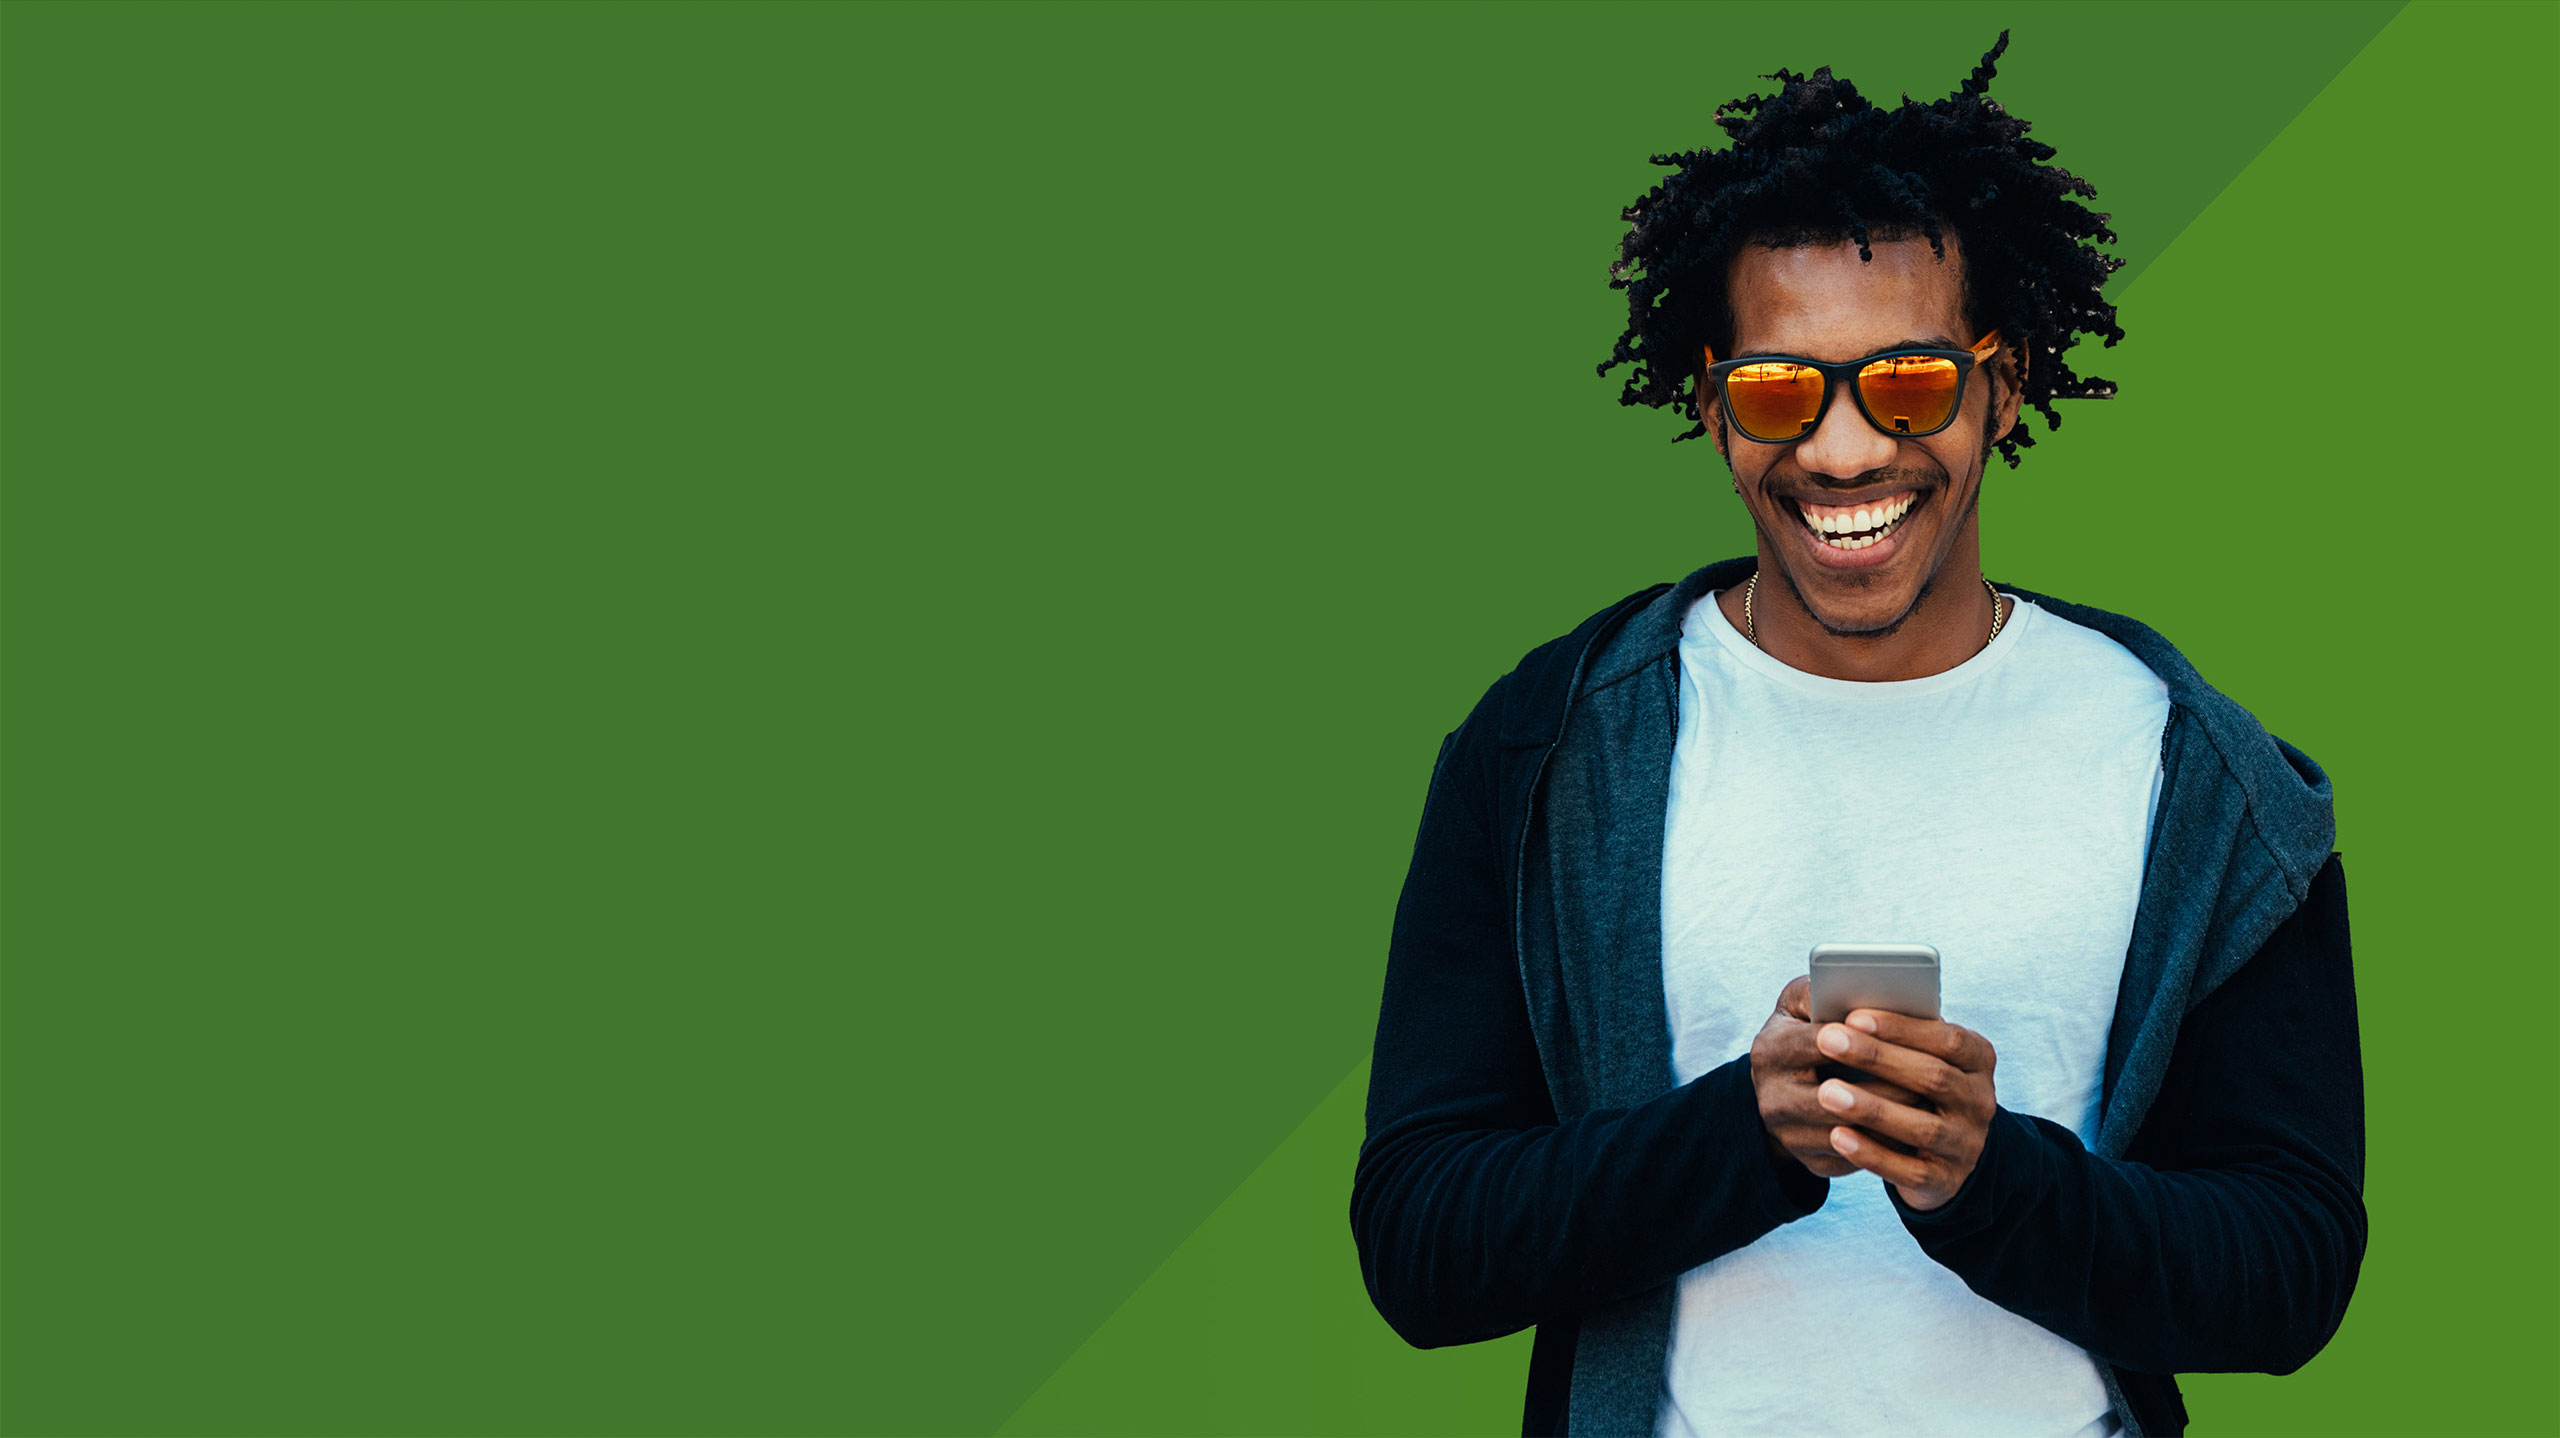 smiling man holding a phone